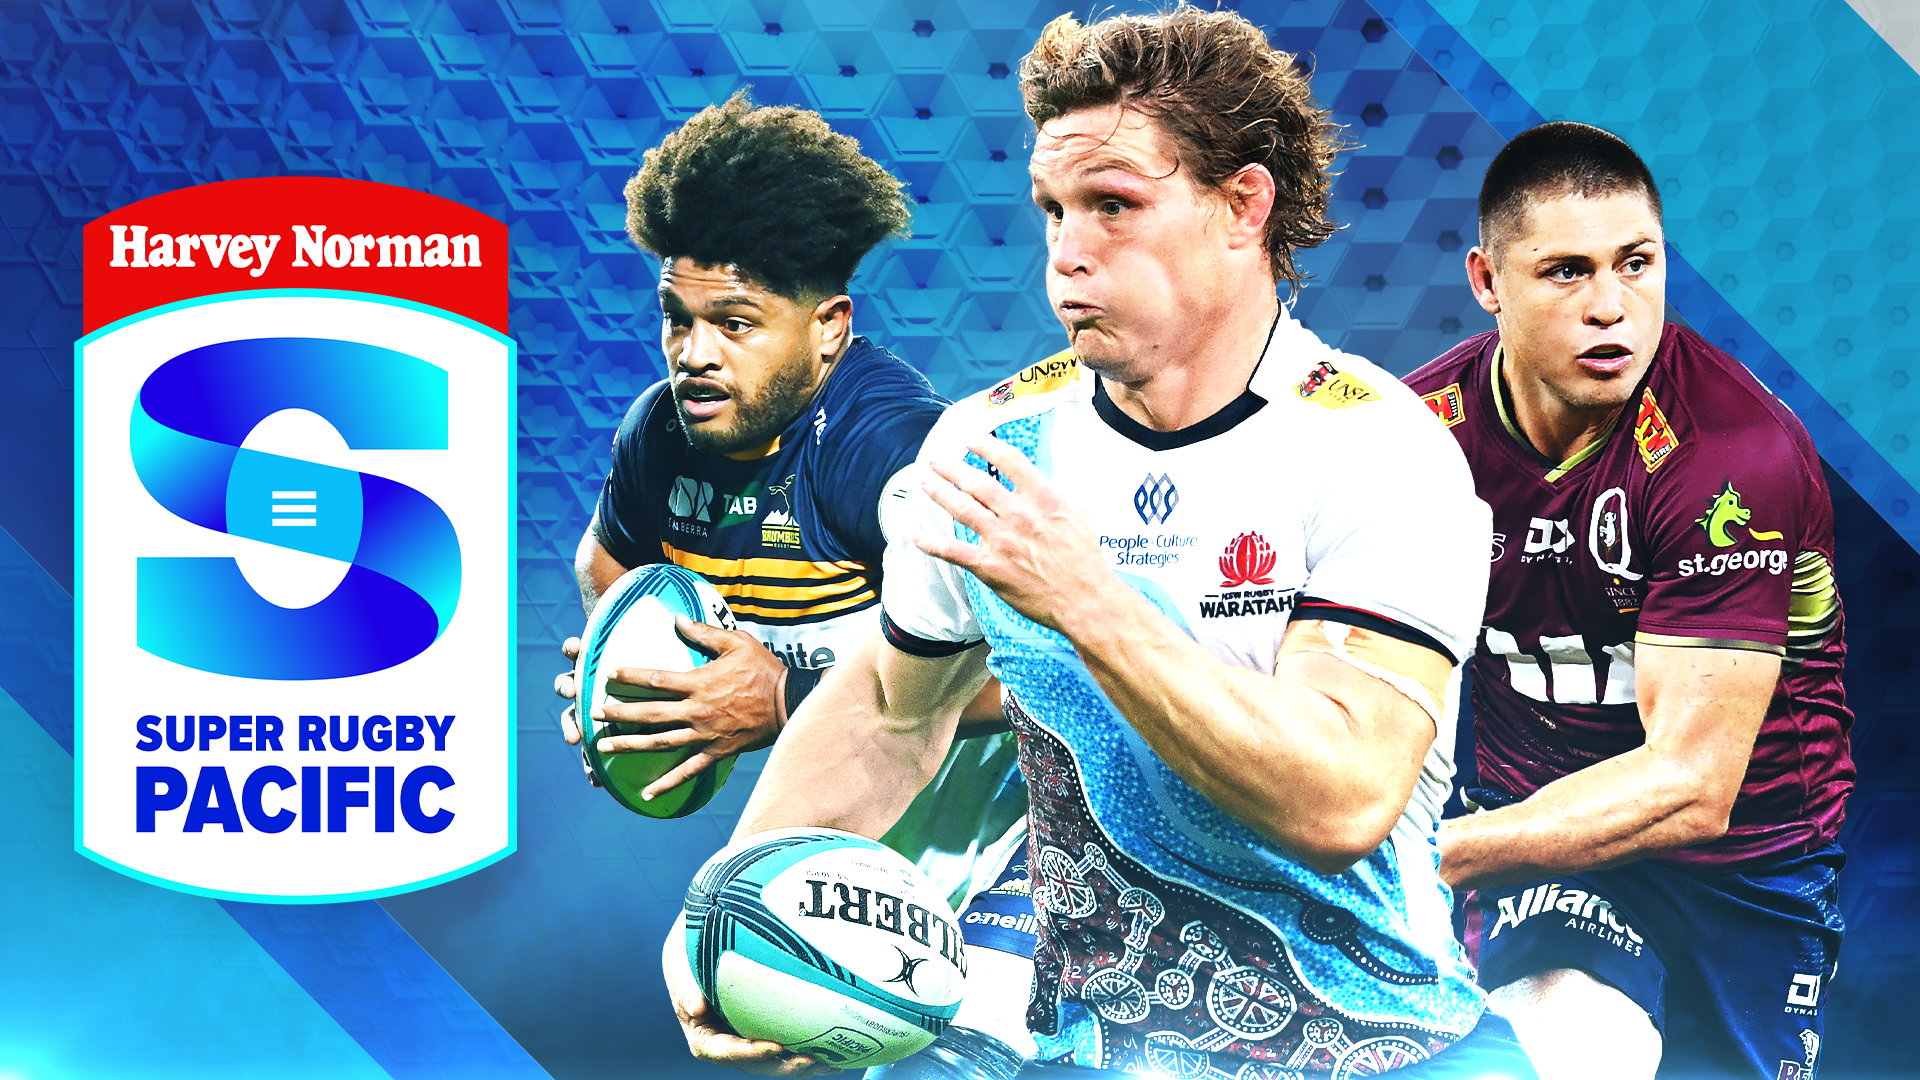 Watch Super Rugby Pacific live or on-demand Freeview Australia